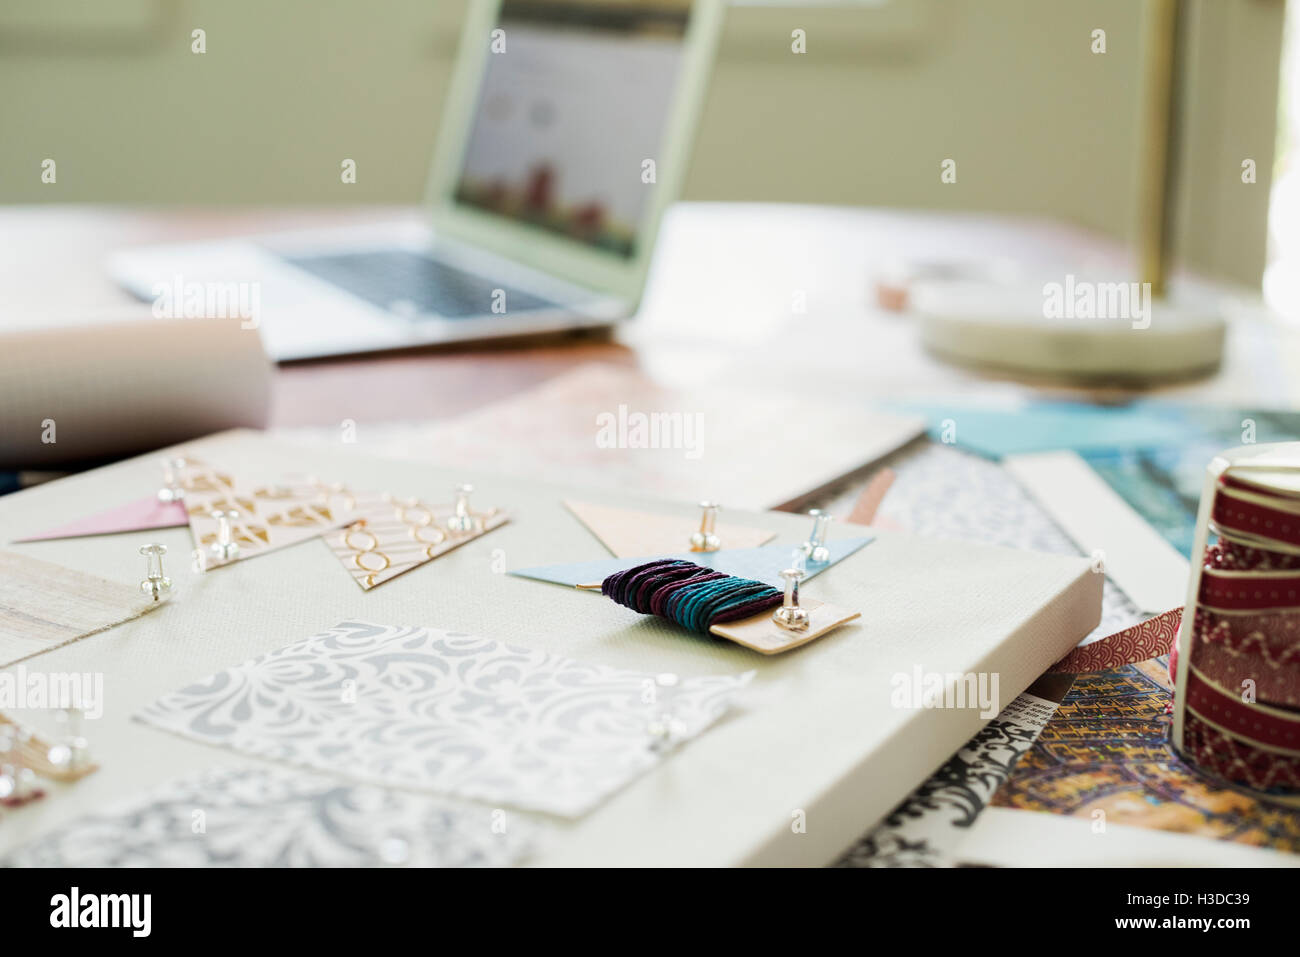 Craft materials, fabric and paper, patterns and a notebook and tablet. Stock Photo